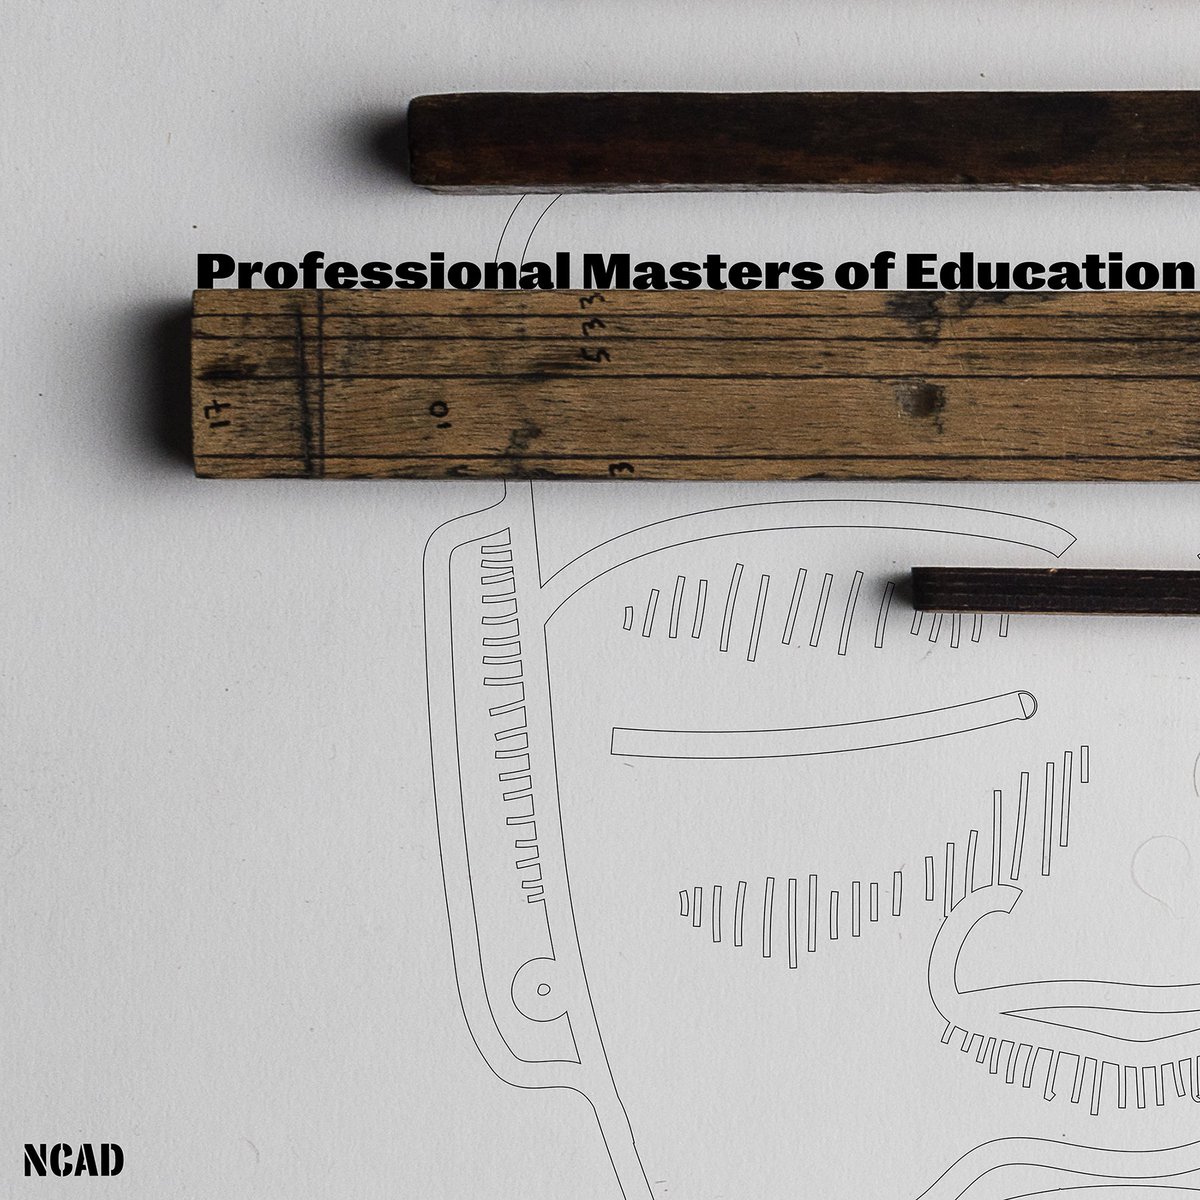 Ever thought of passing your skills on to future generations of artists and innovators? NCAD's internationally renowned Professional Master's of Education prepares you for the next step of your career. For full details check the link in bio today.